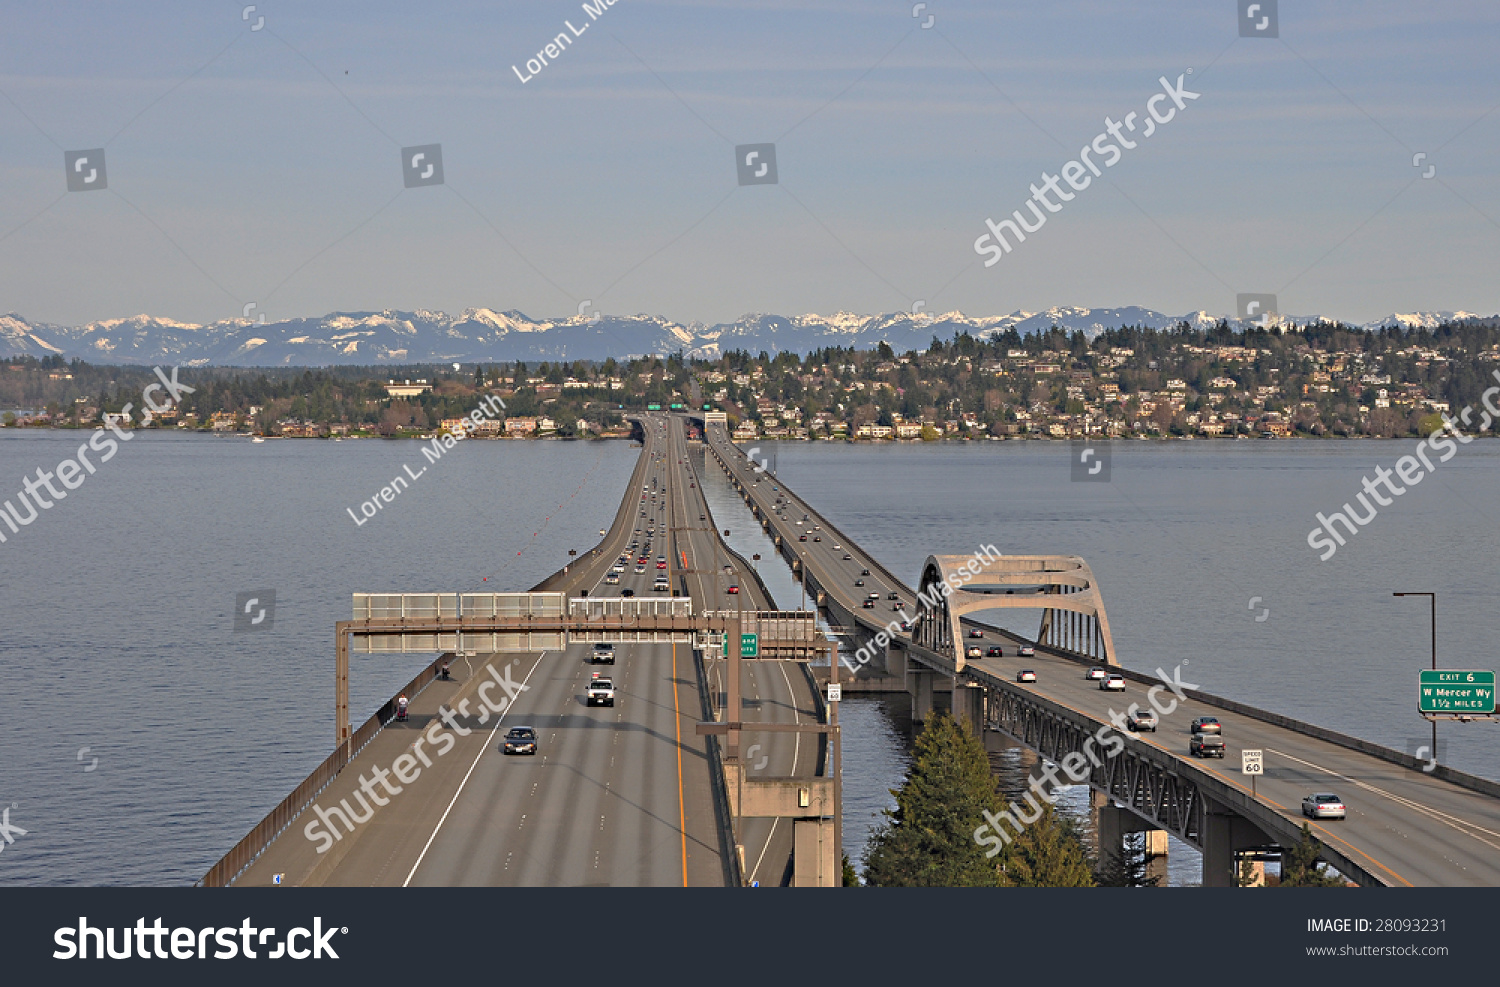 The I-90 floating bridge in Seattle. Mercer Island and the cascade mountains in the background. #28093231